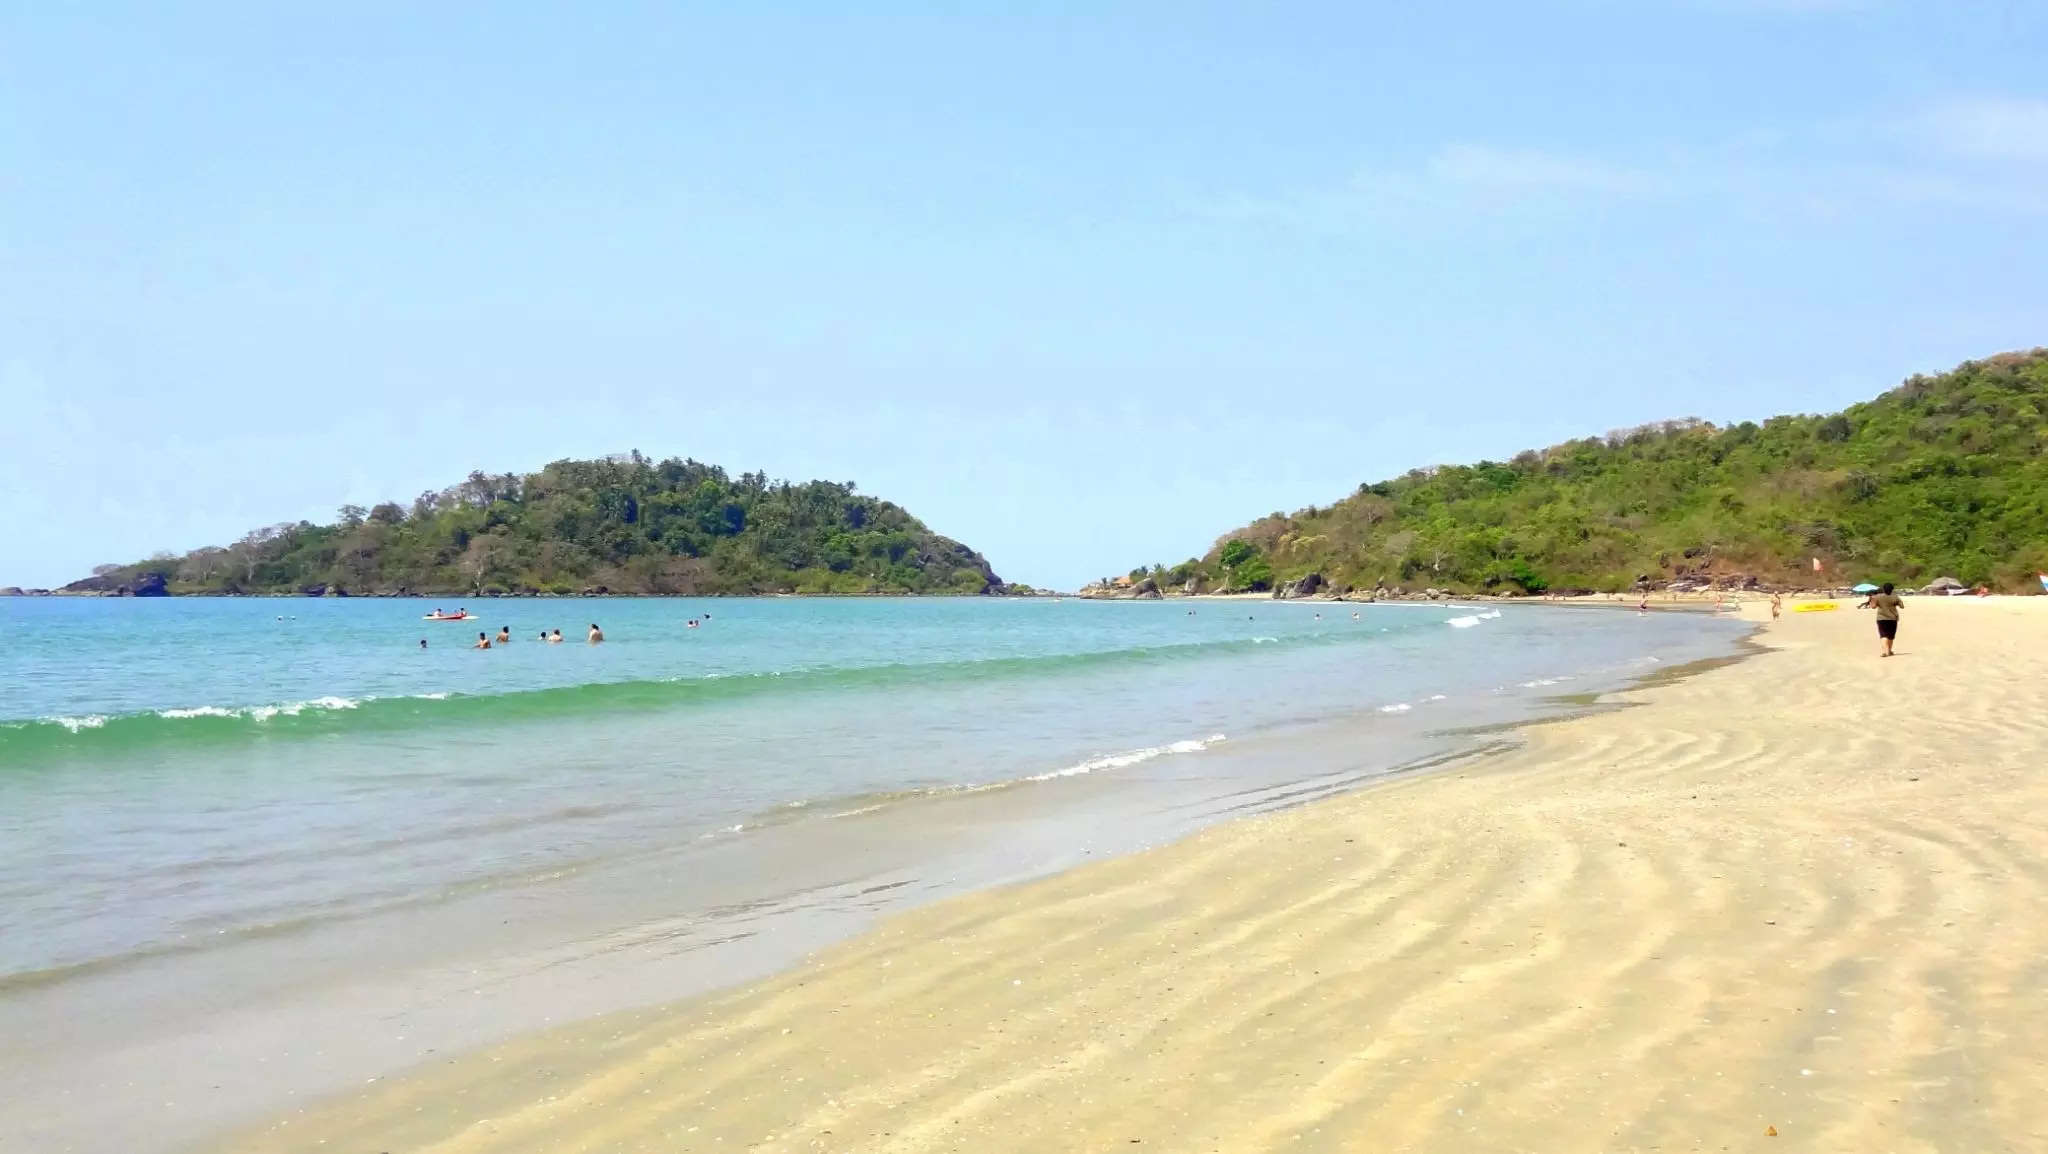 Goa govt to develop eco-tourism in forest areas